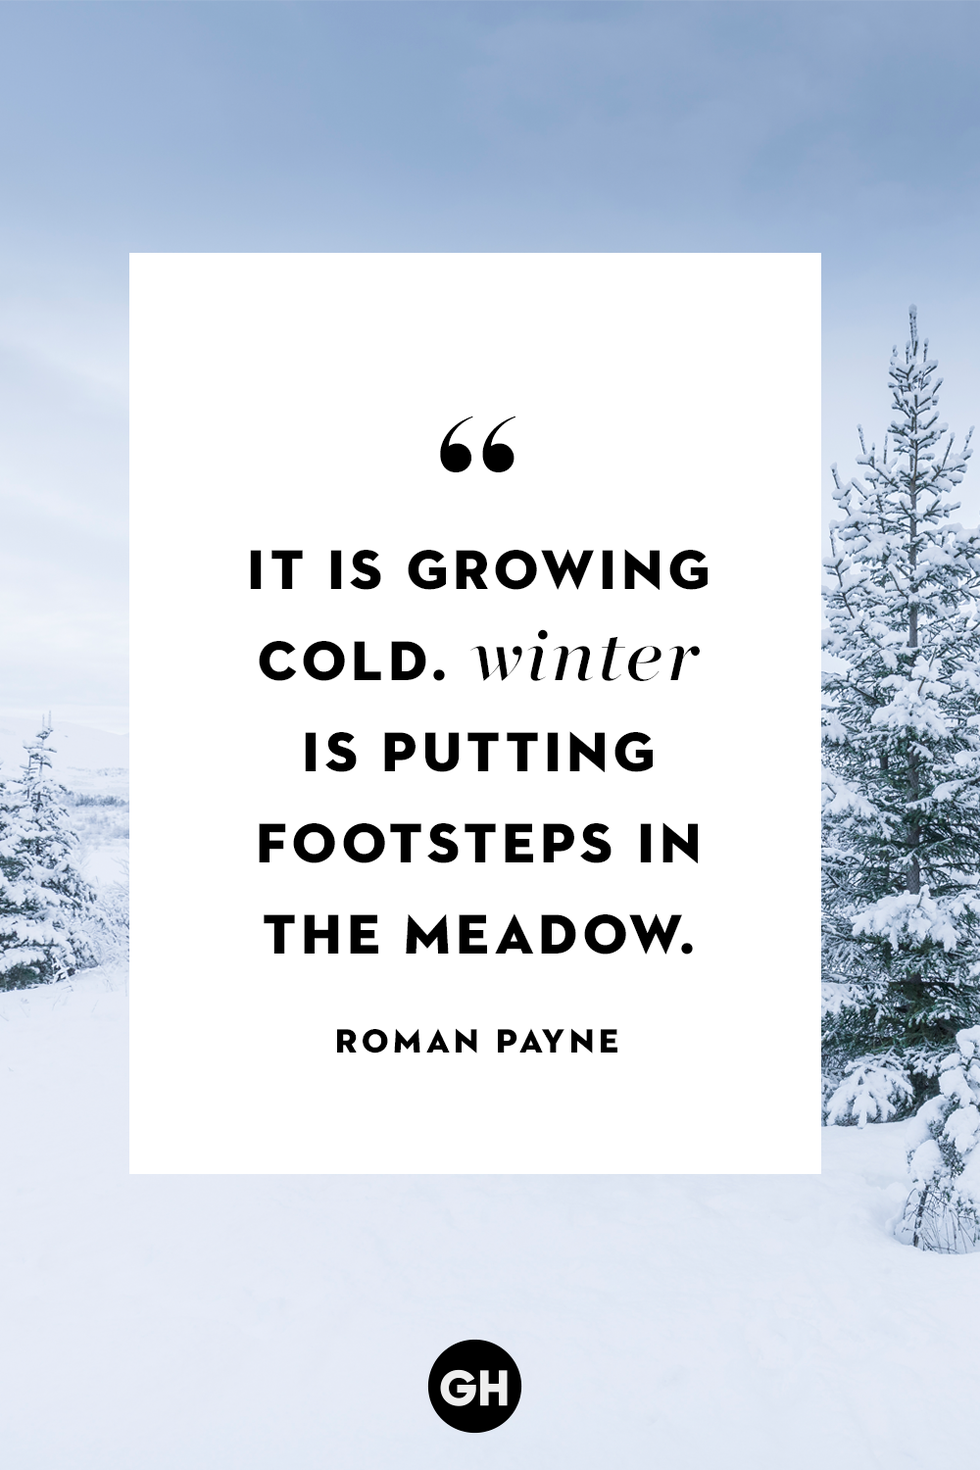 42 Best Winter Quotes - Short and Cute Quotes to Welcome Winter